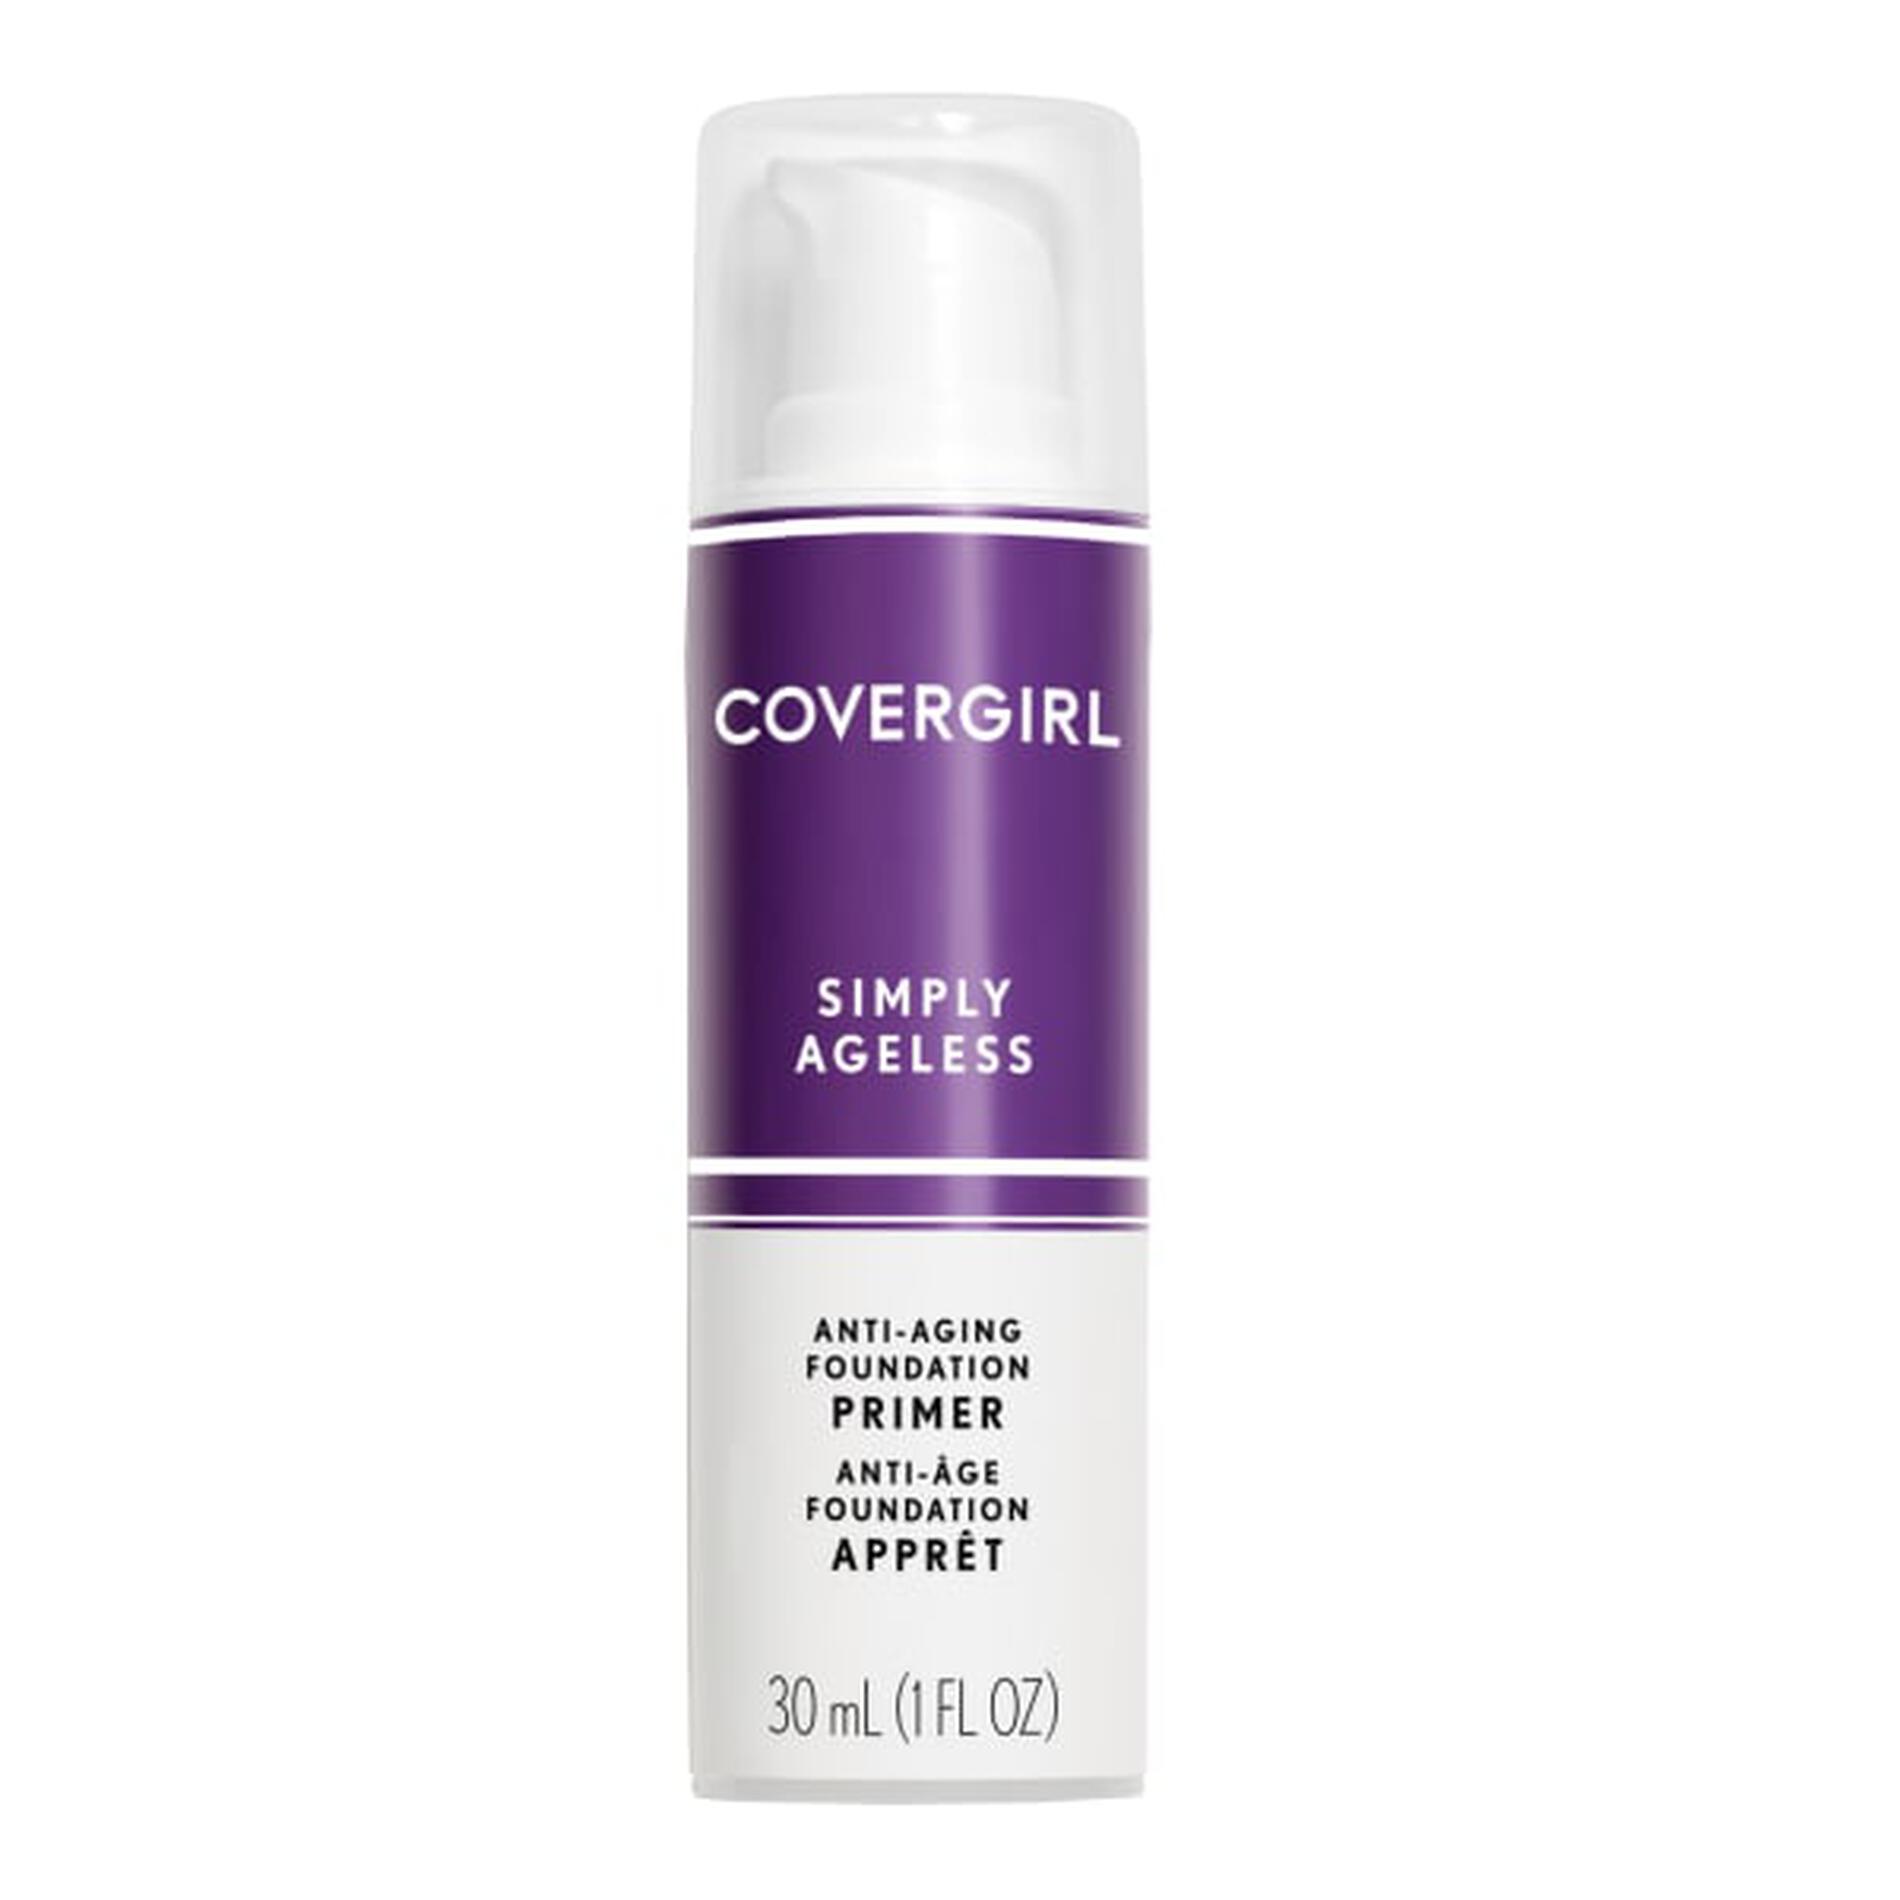 Covergirl Simply Ageless Anti-Aging Foundation Primer